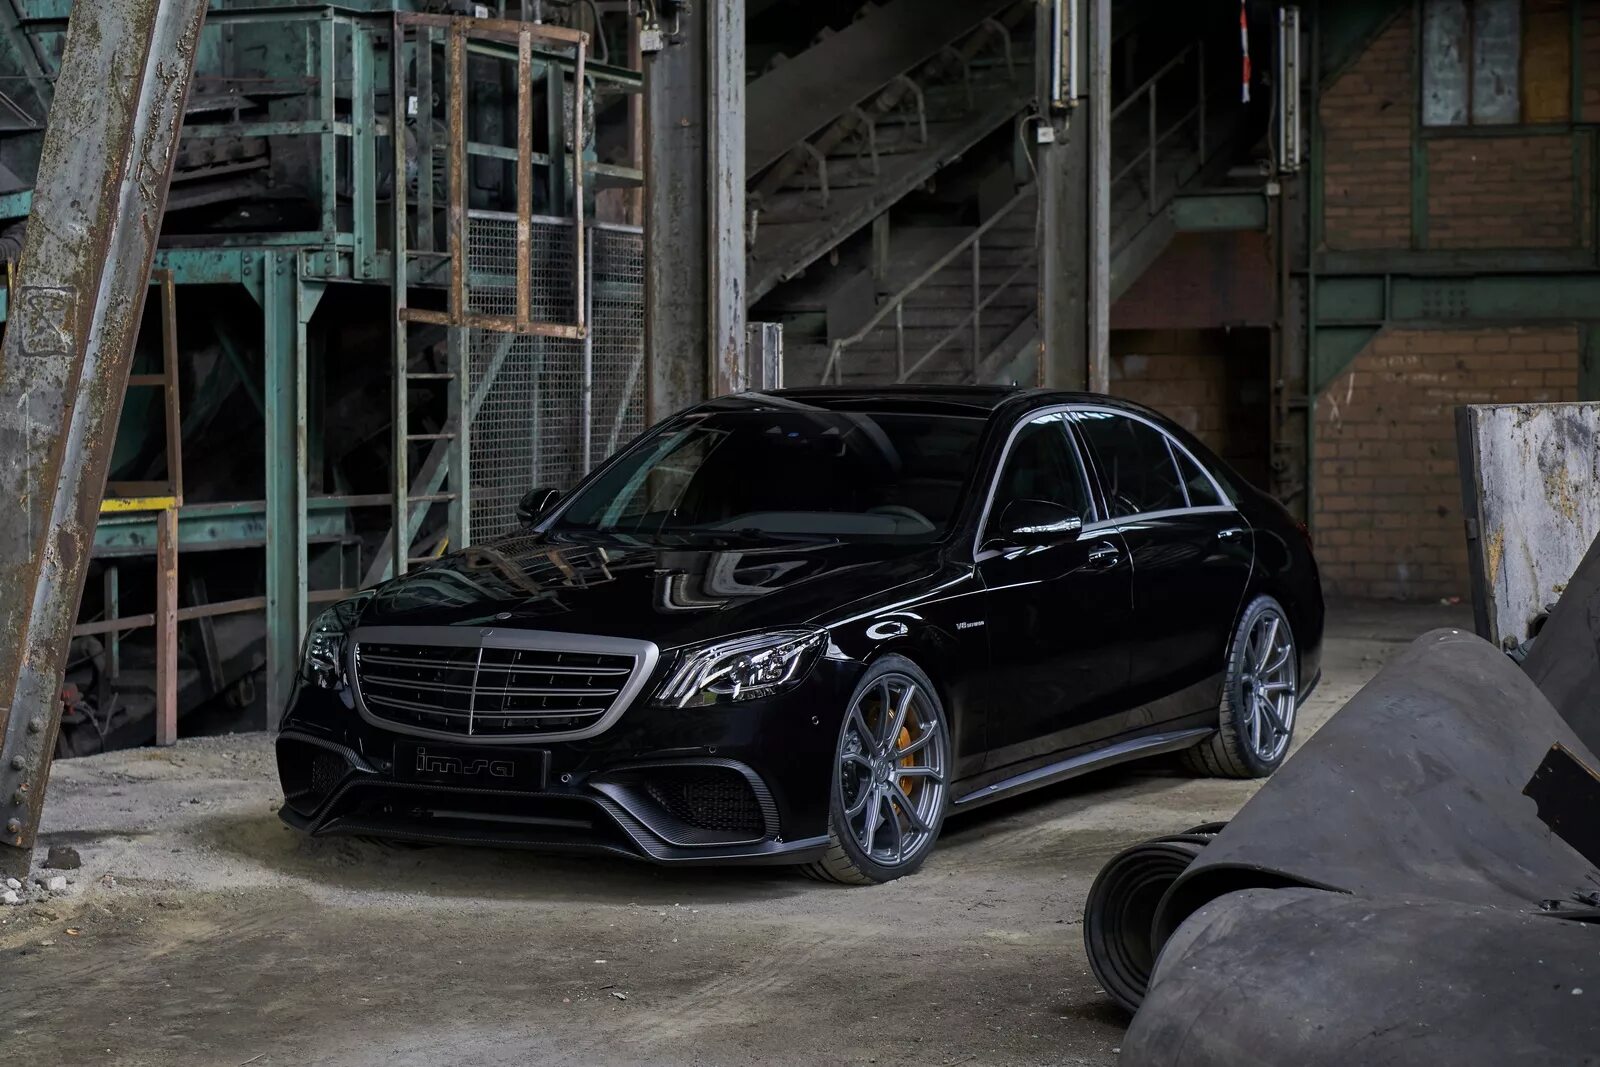 Tuning complete. Mercedes Benz s63 AMG w222 Black. Mercedes Benz s class w222 63 AMG. Mercedes Benz s63 AMG черный. Mercedes Benz s class w222 s63 AMG.